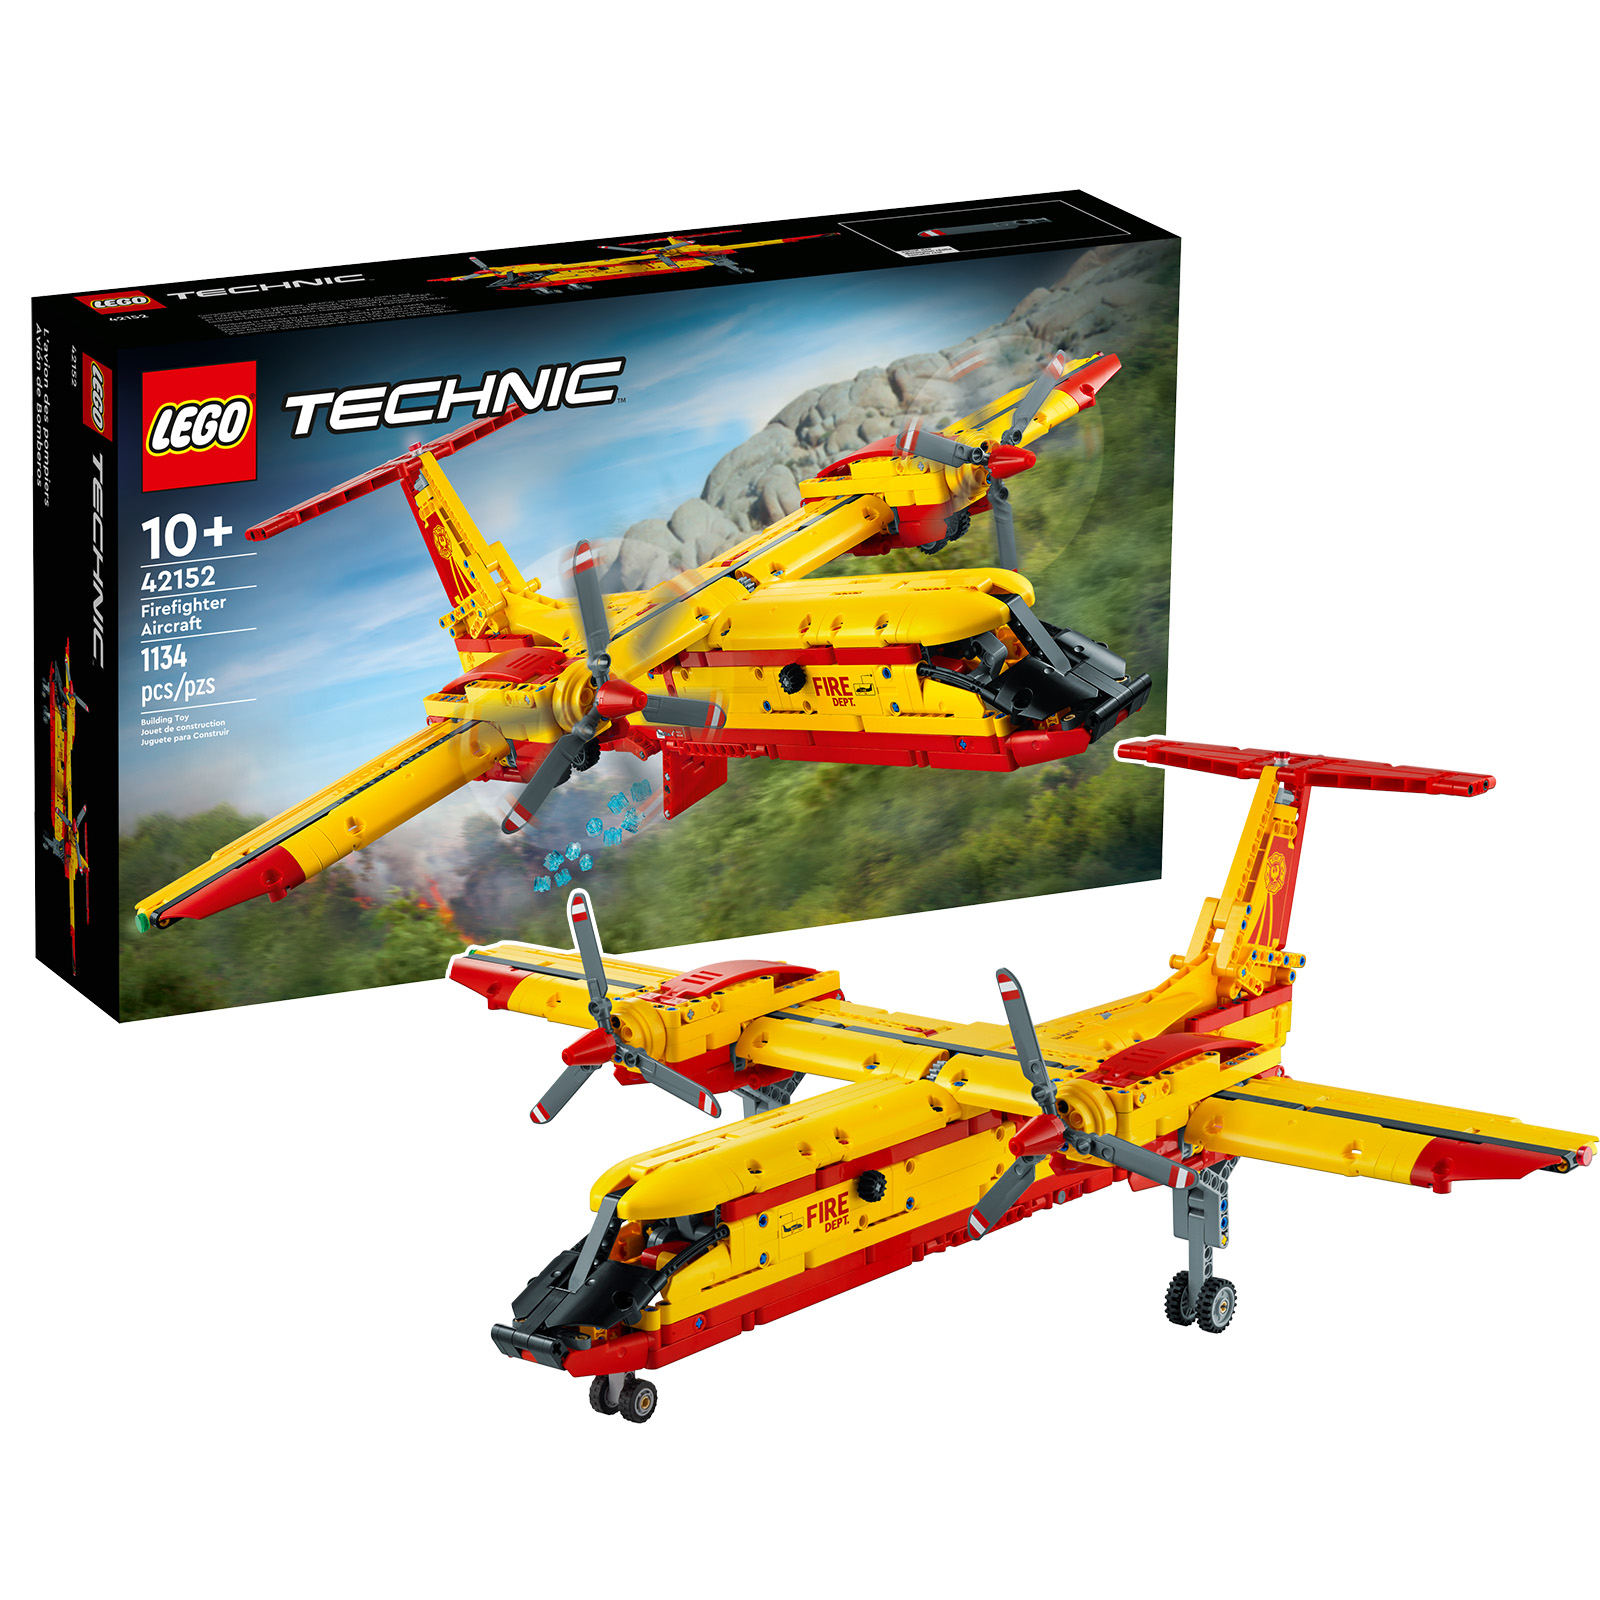 On the LEGO Shop: the LEGO Technic 42152 Firefighter Aircraft set is on pre-order